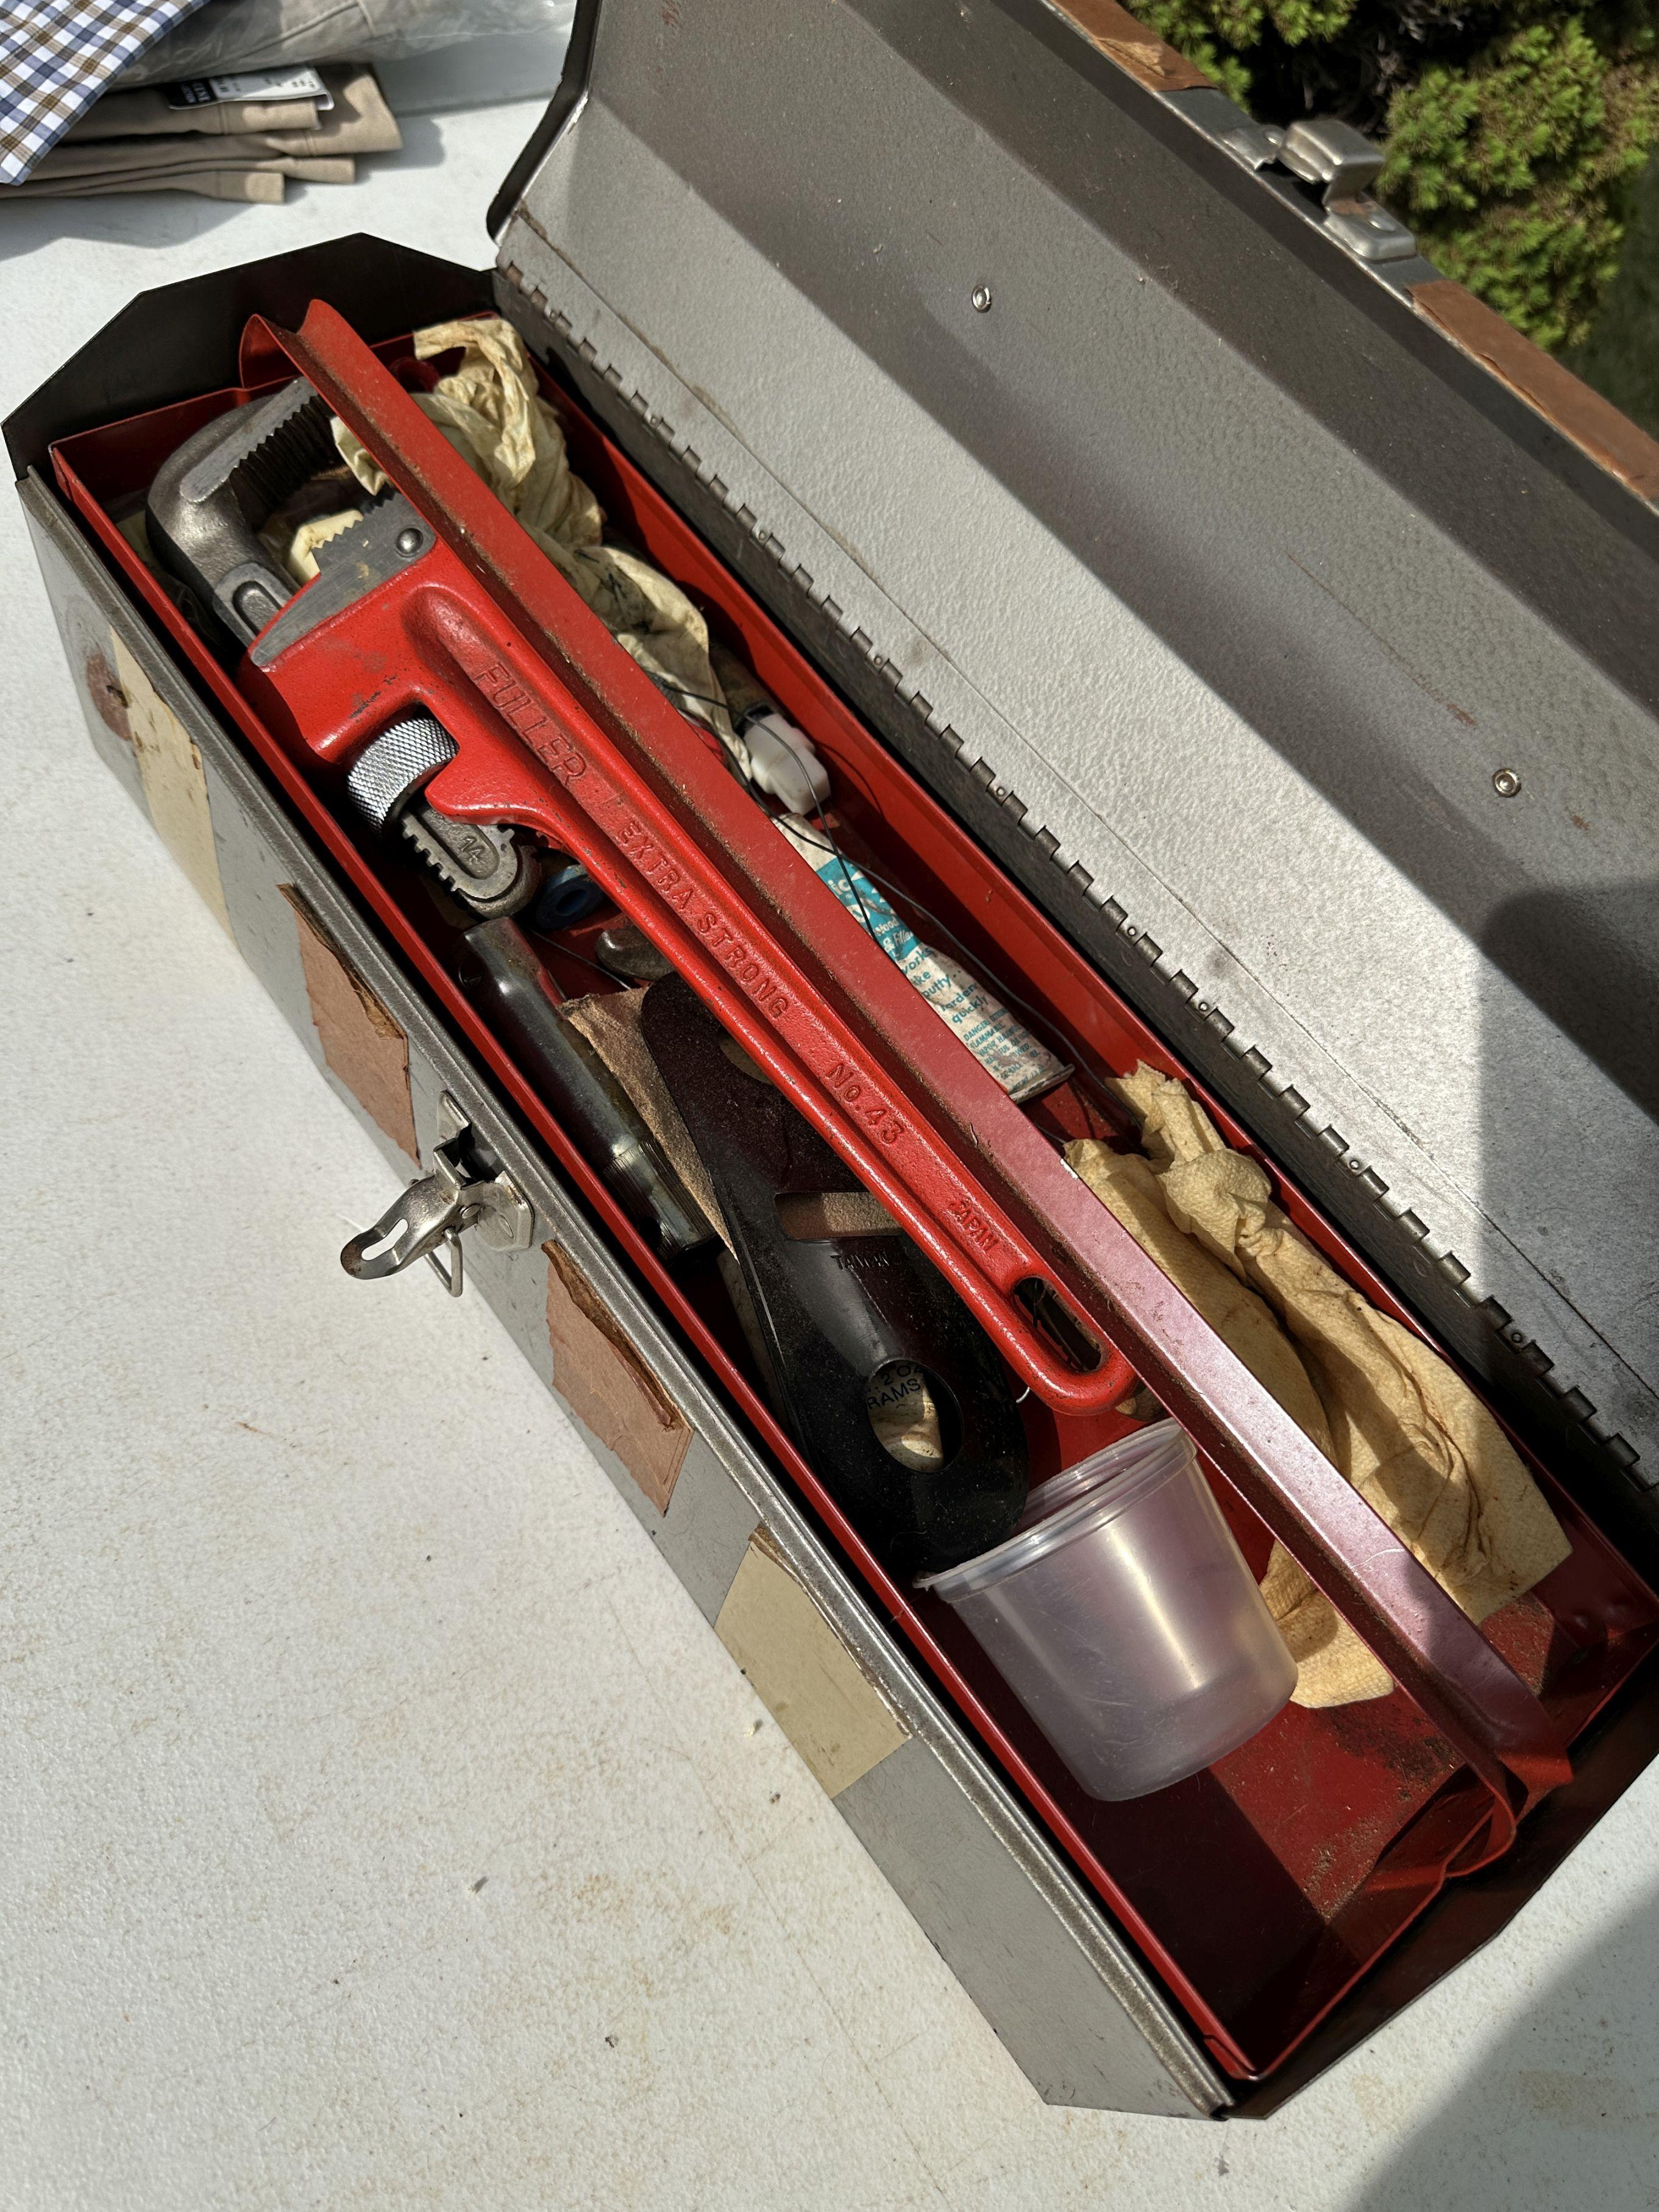 Approx 19 Inch Metal Tool Box with Misc Tools